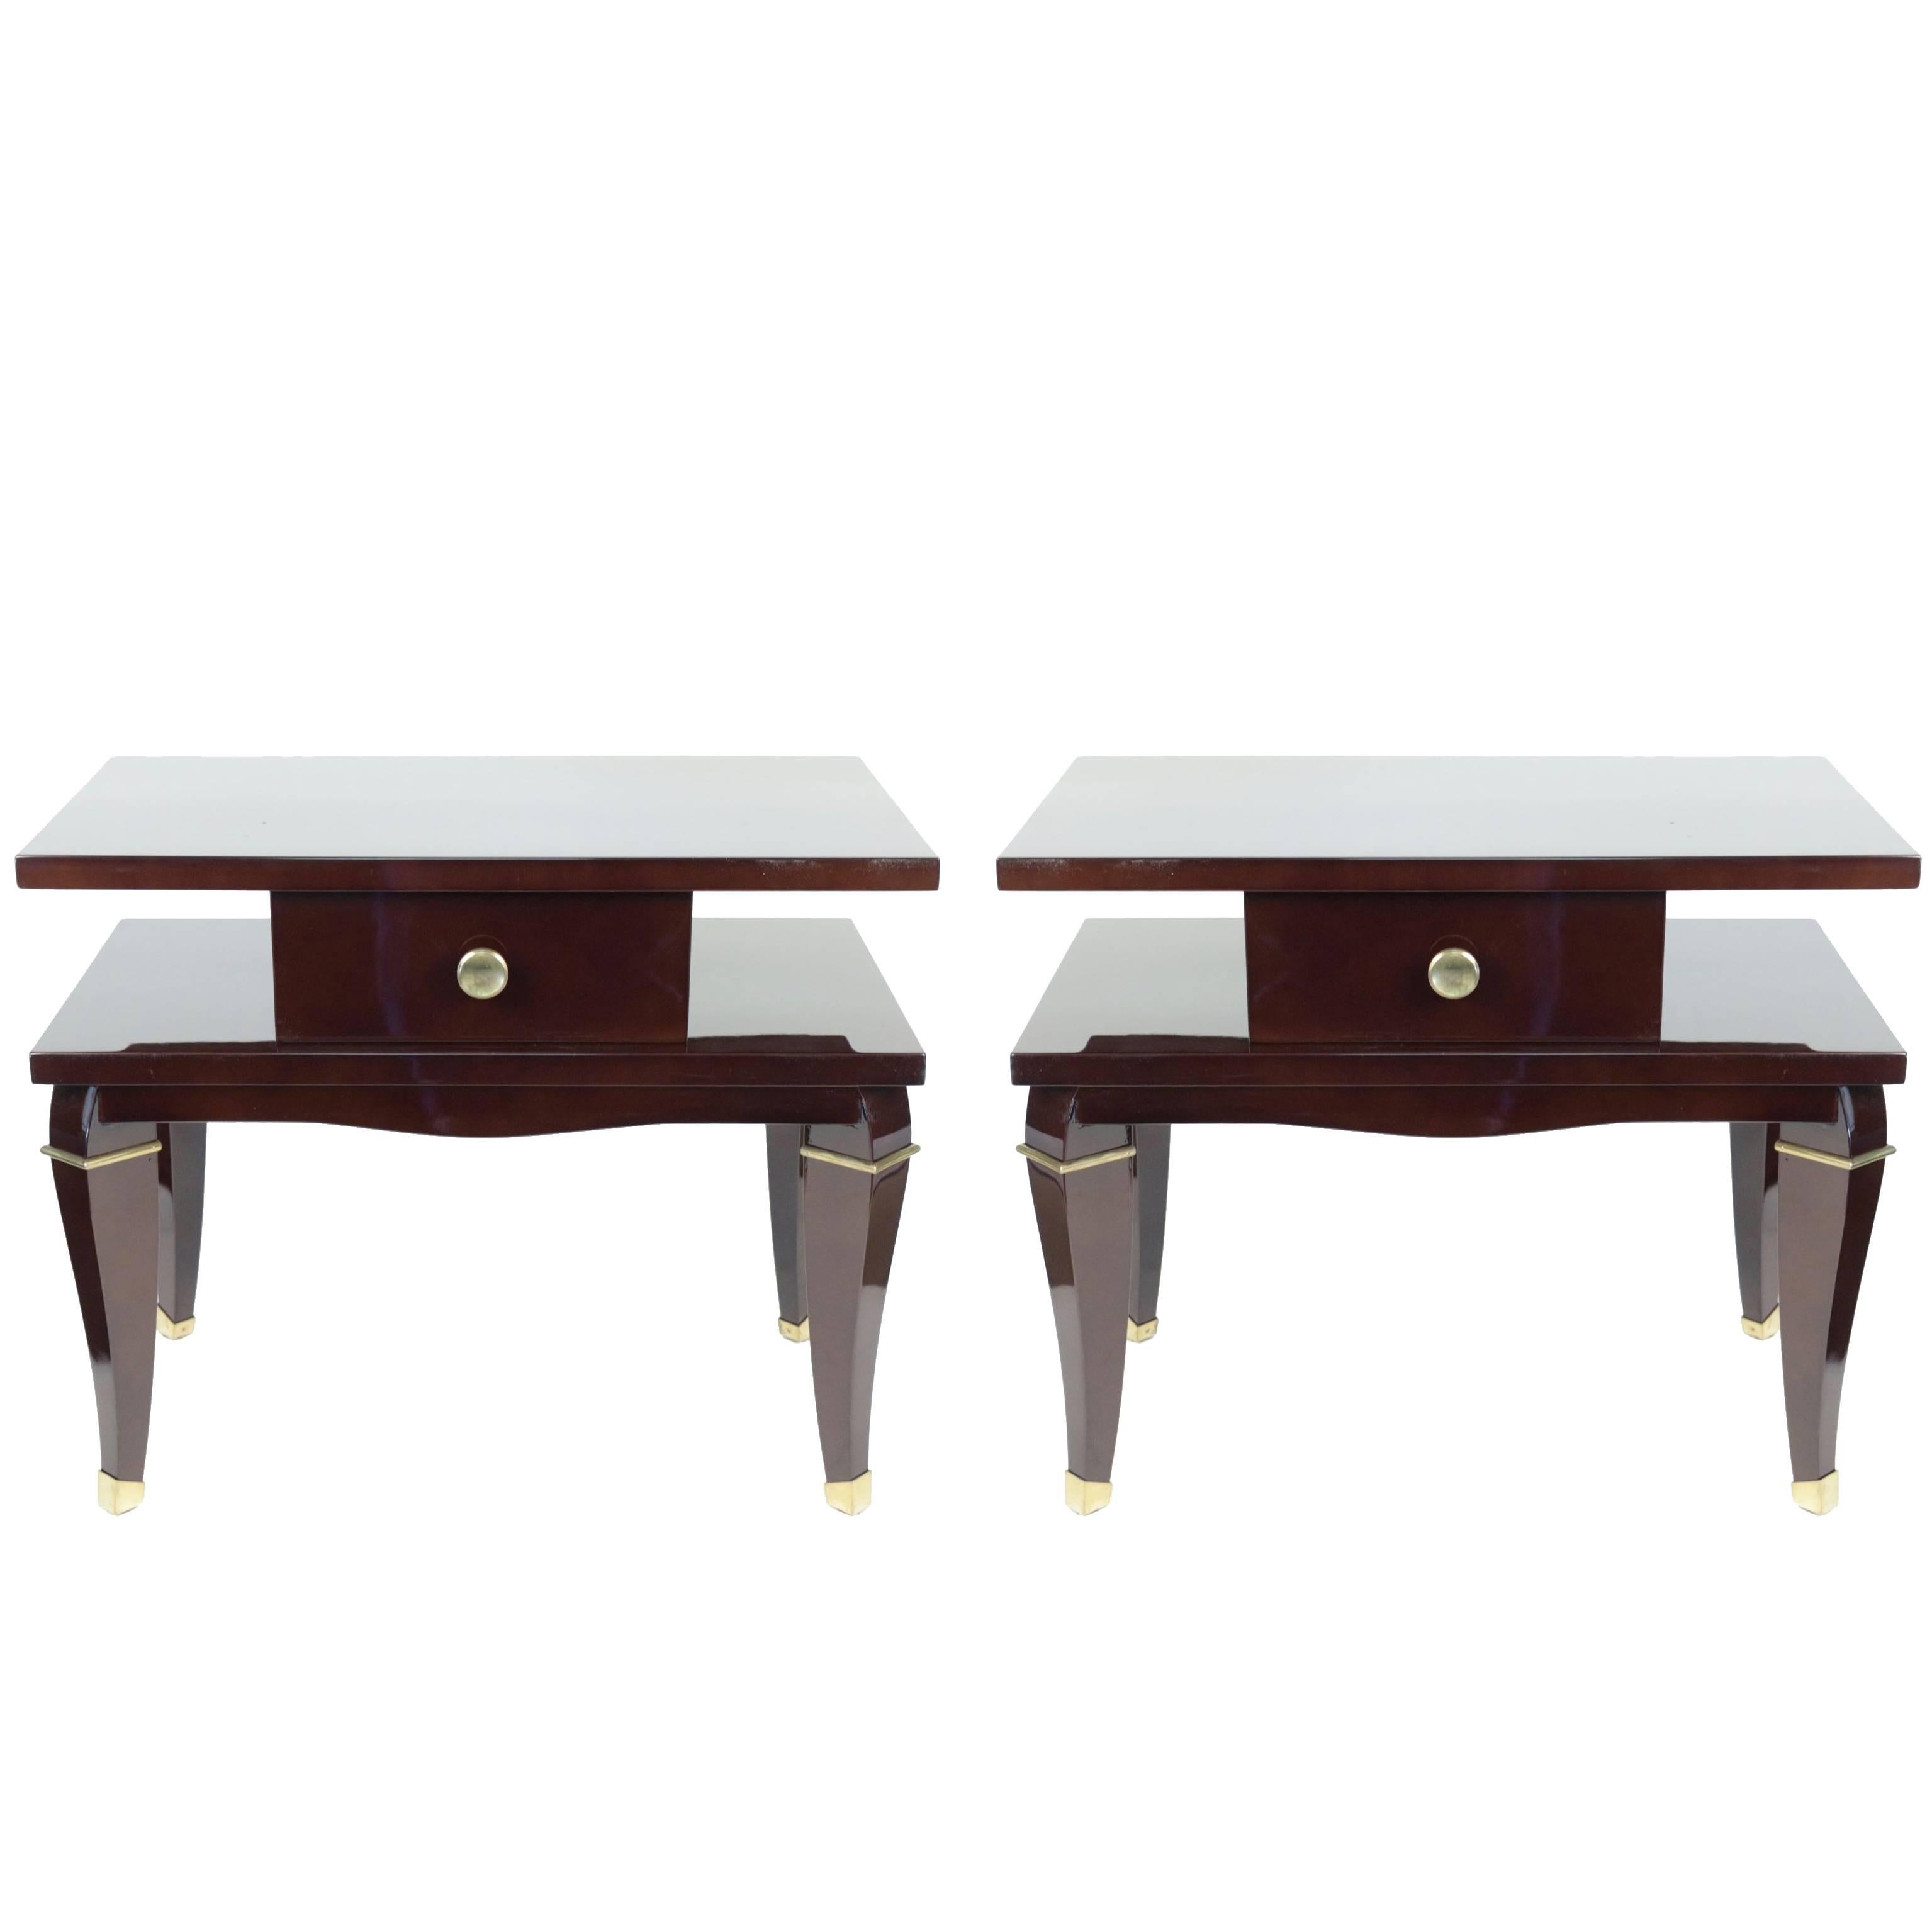 Nice Pair of 1950s Bedside Tables, Lacquered Mahogany, Gilded Bronze Ornaments